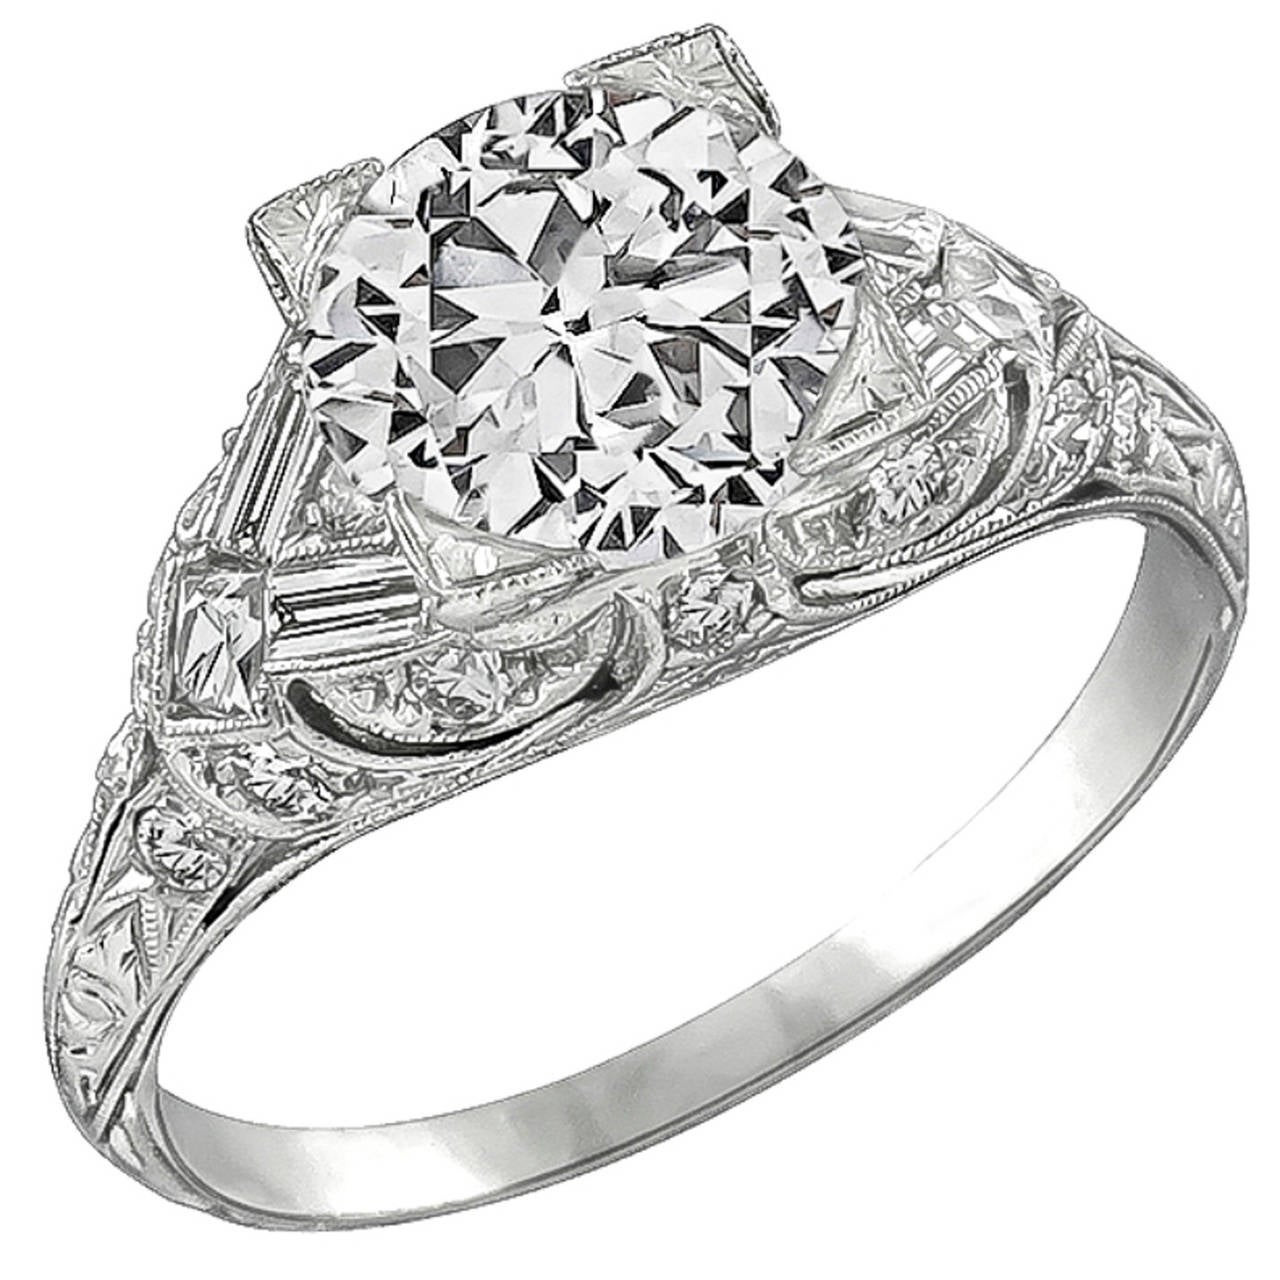 What is art deco ring?